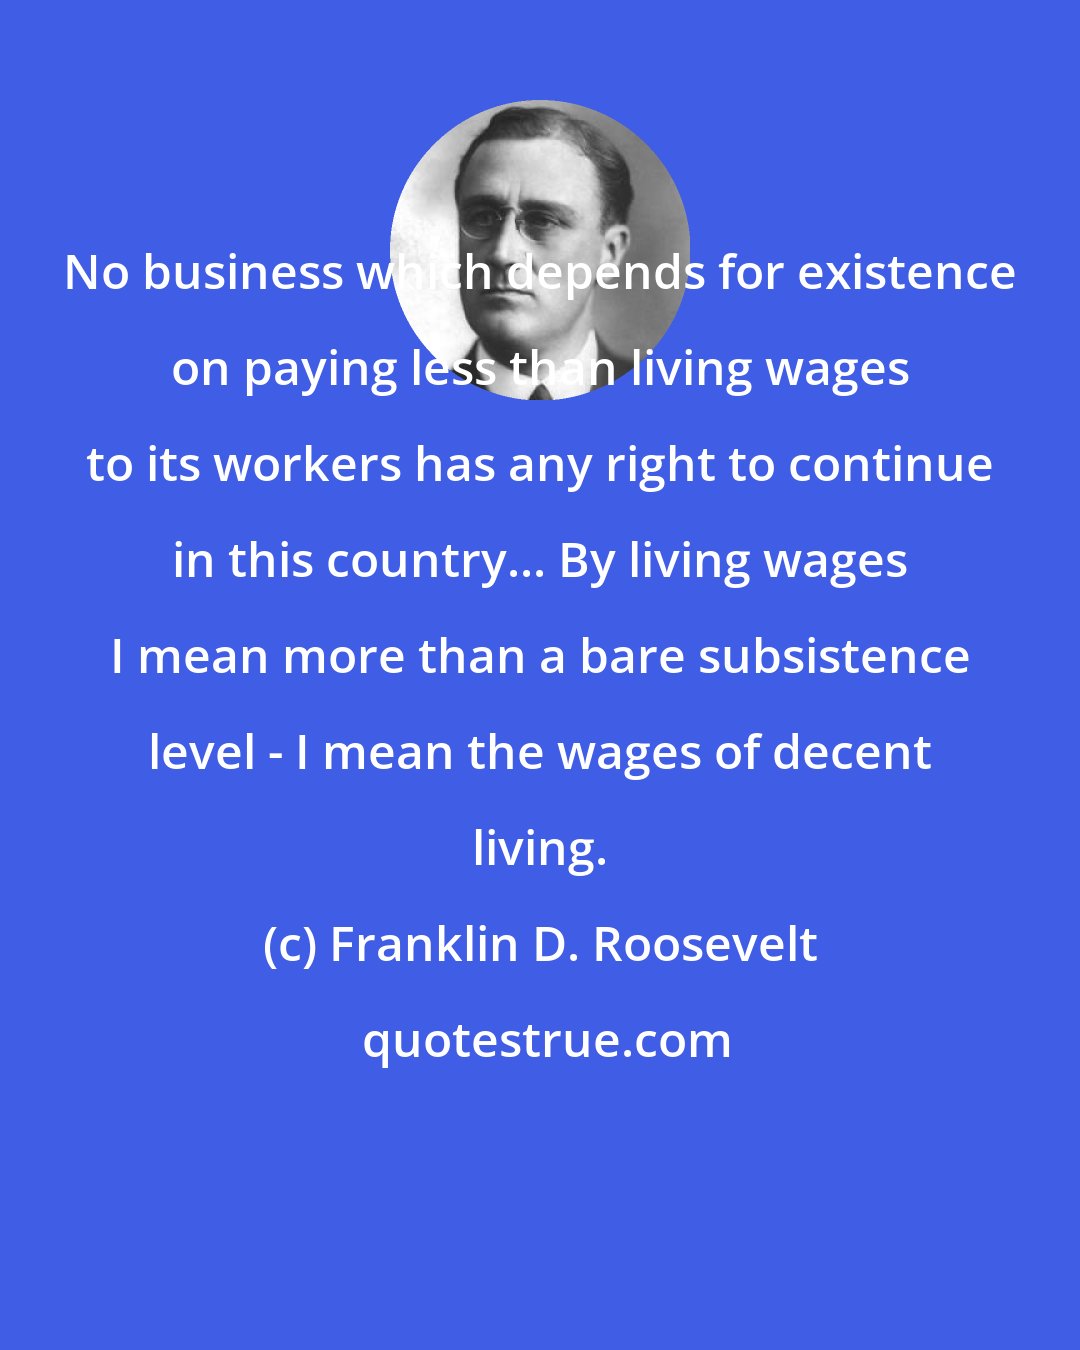 Franklin D. Roosevelt: No business which depends for existence on paying less than living wages to its workers has any right to continue in this country... By living wages I mean more than a bare subsistence level - I mean the wages of decent living.